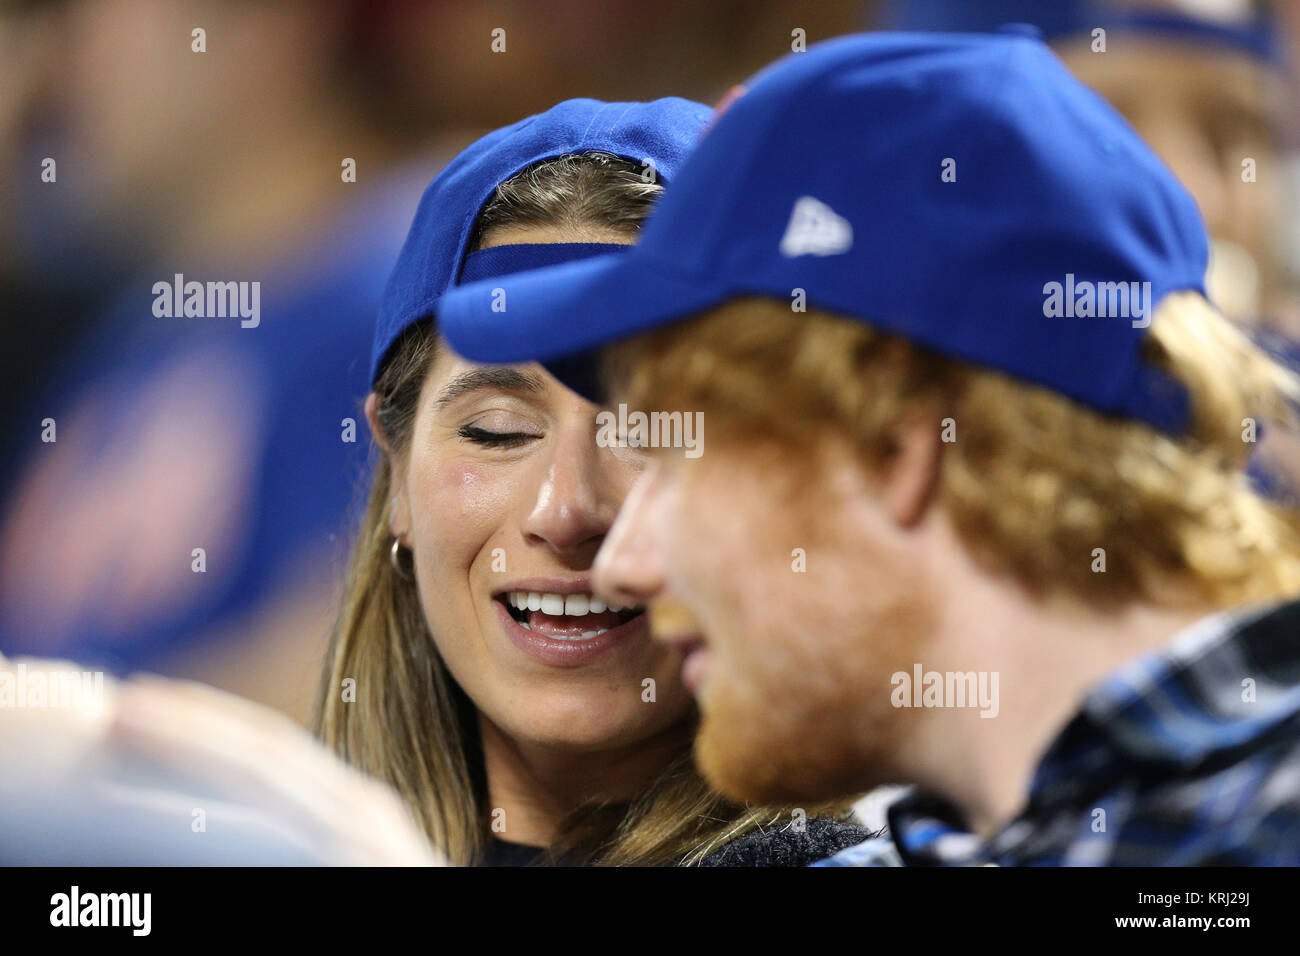 NEW YORK, NY - SEPTEMBER 02: Singer Ed Sheeran again out with his mystery lady this time at the Philadelphia Phillies Vs New York Mets at Citi Field on September 2, 2015 in the Flushing neighborhood of the Queens borough of New York City.  People:  Ed Sheeran Stock Photo